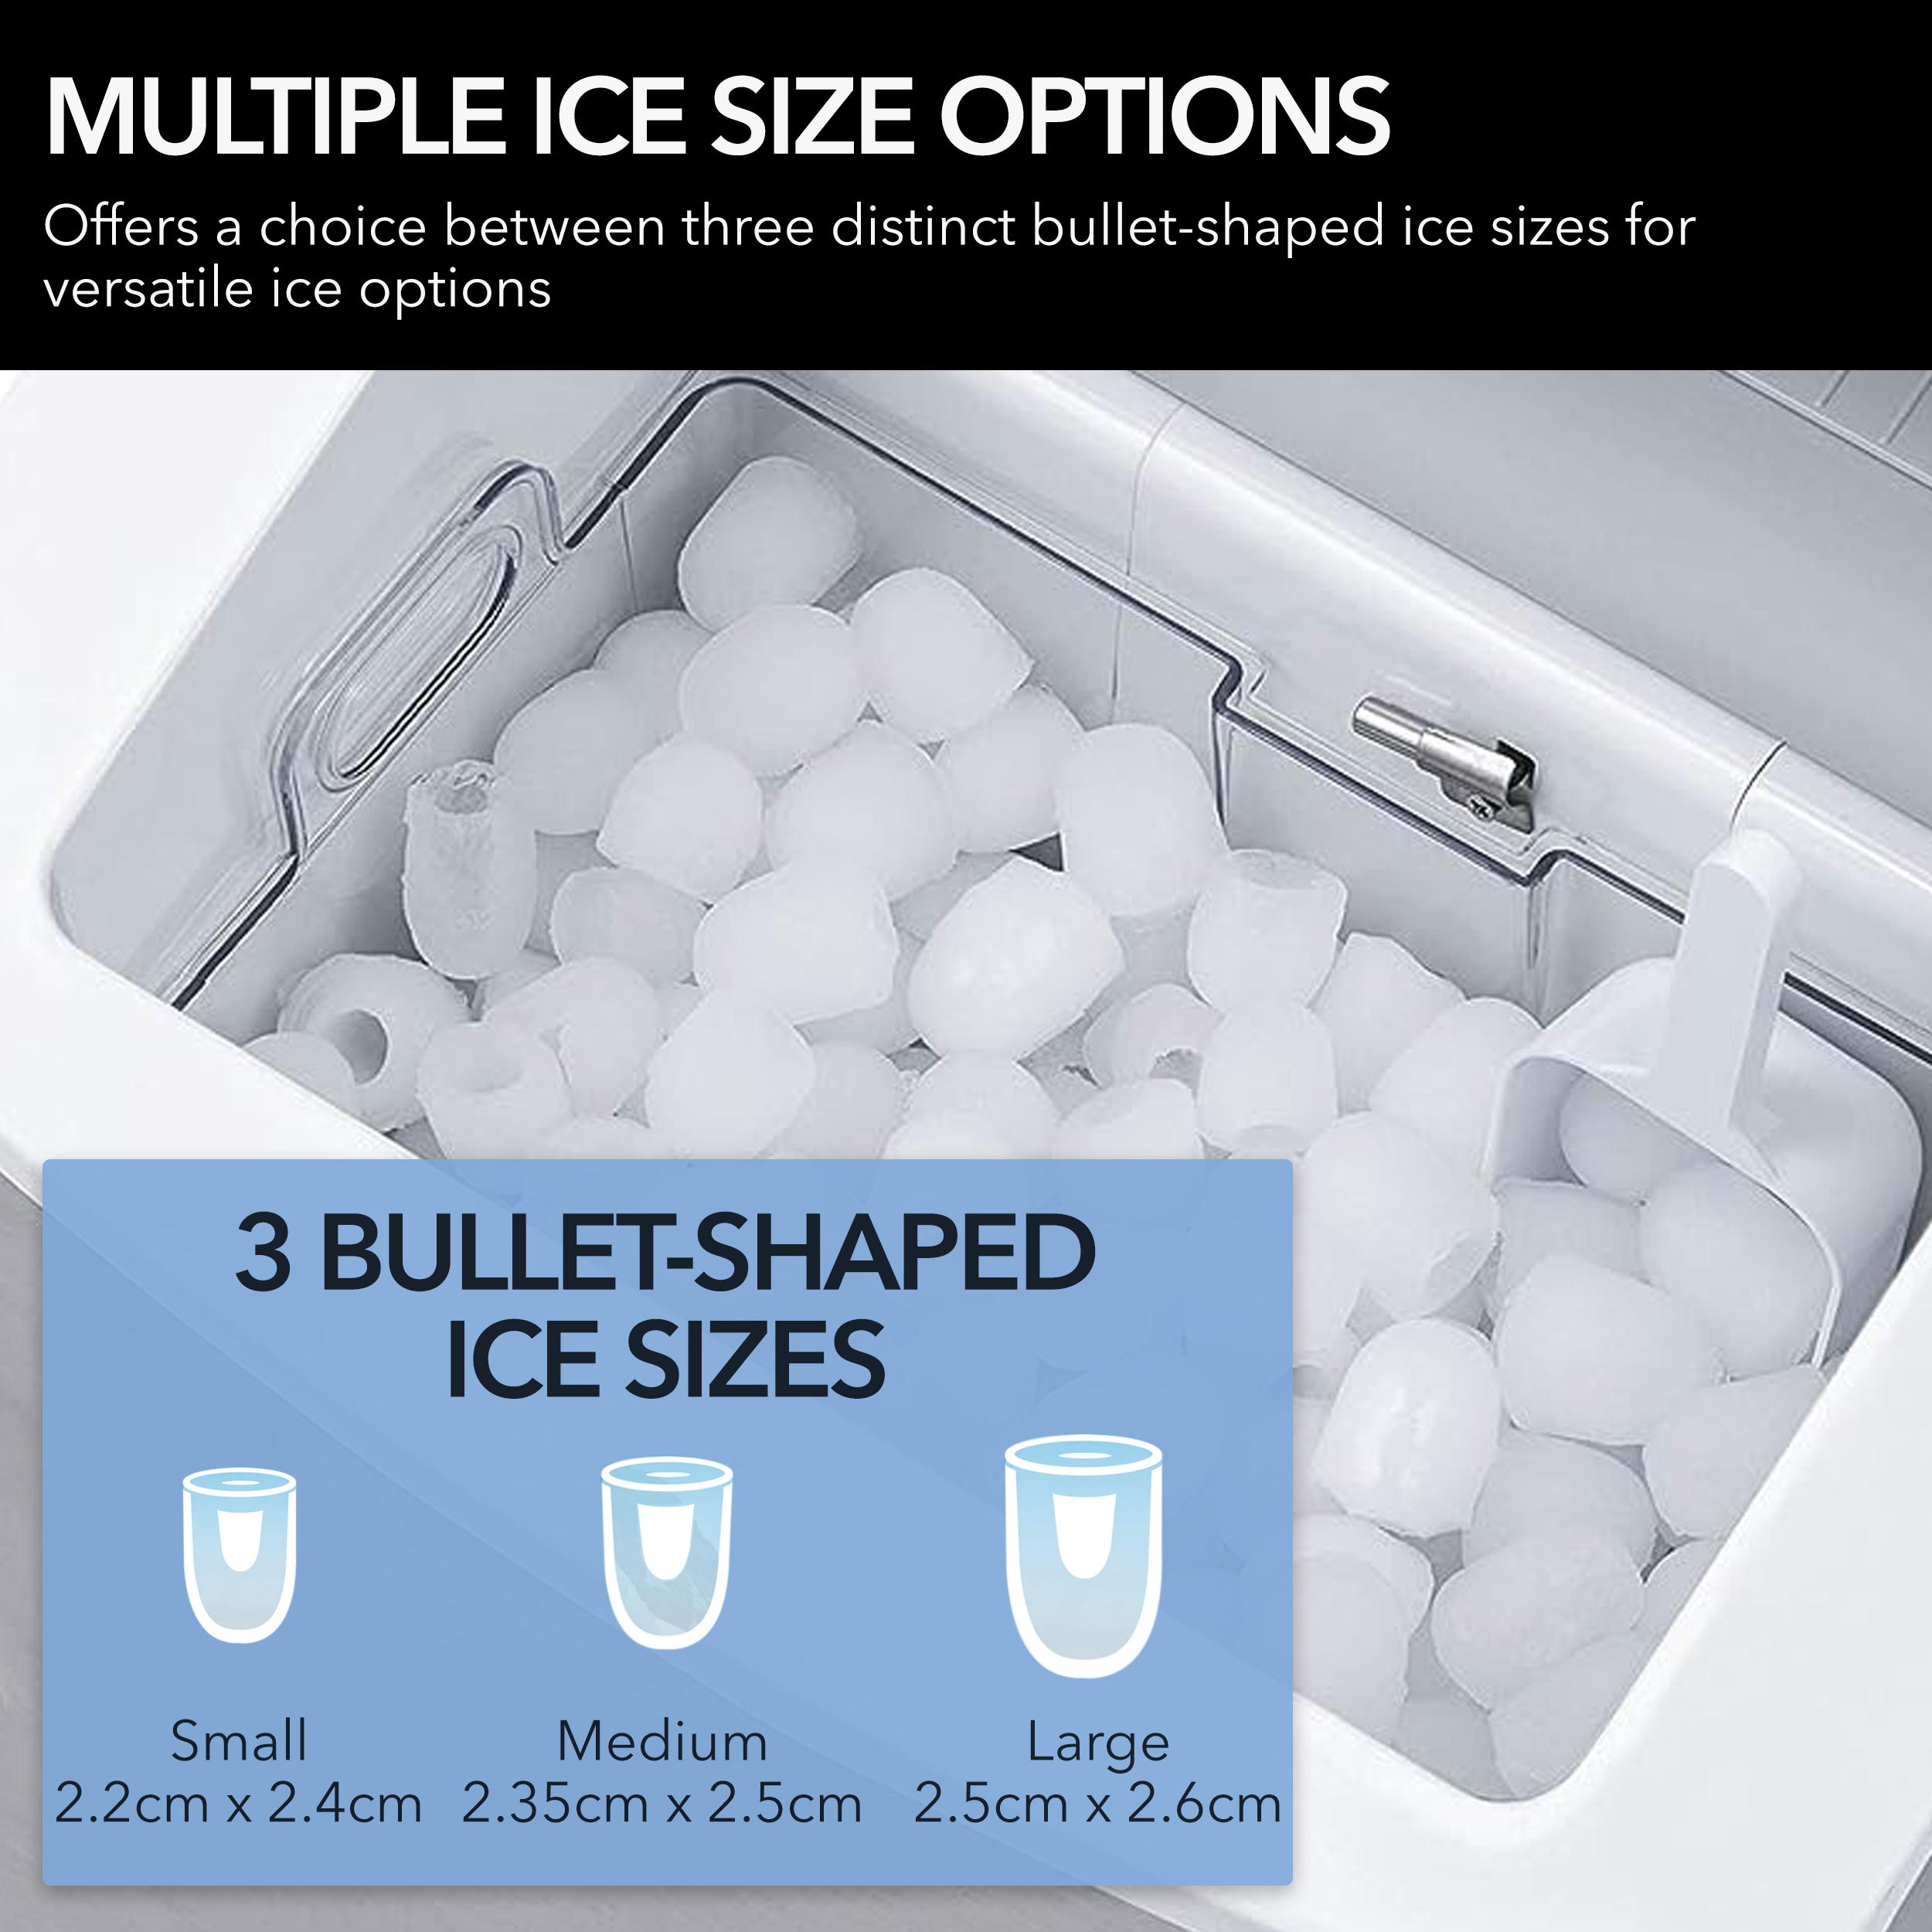 Whynter Portable Table Top Ice Maker